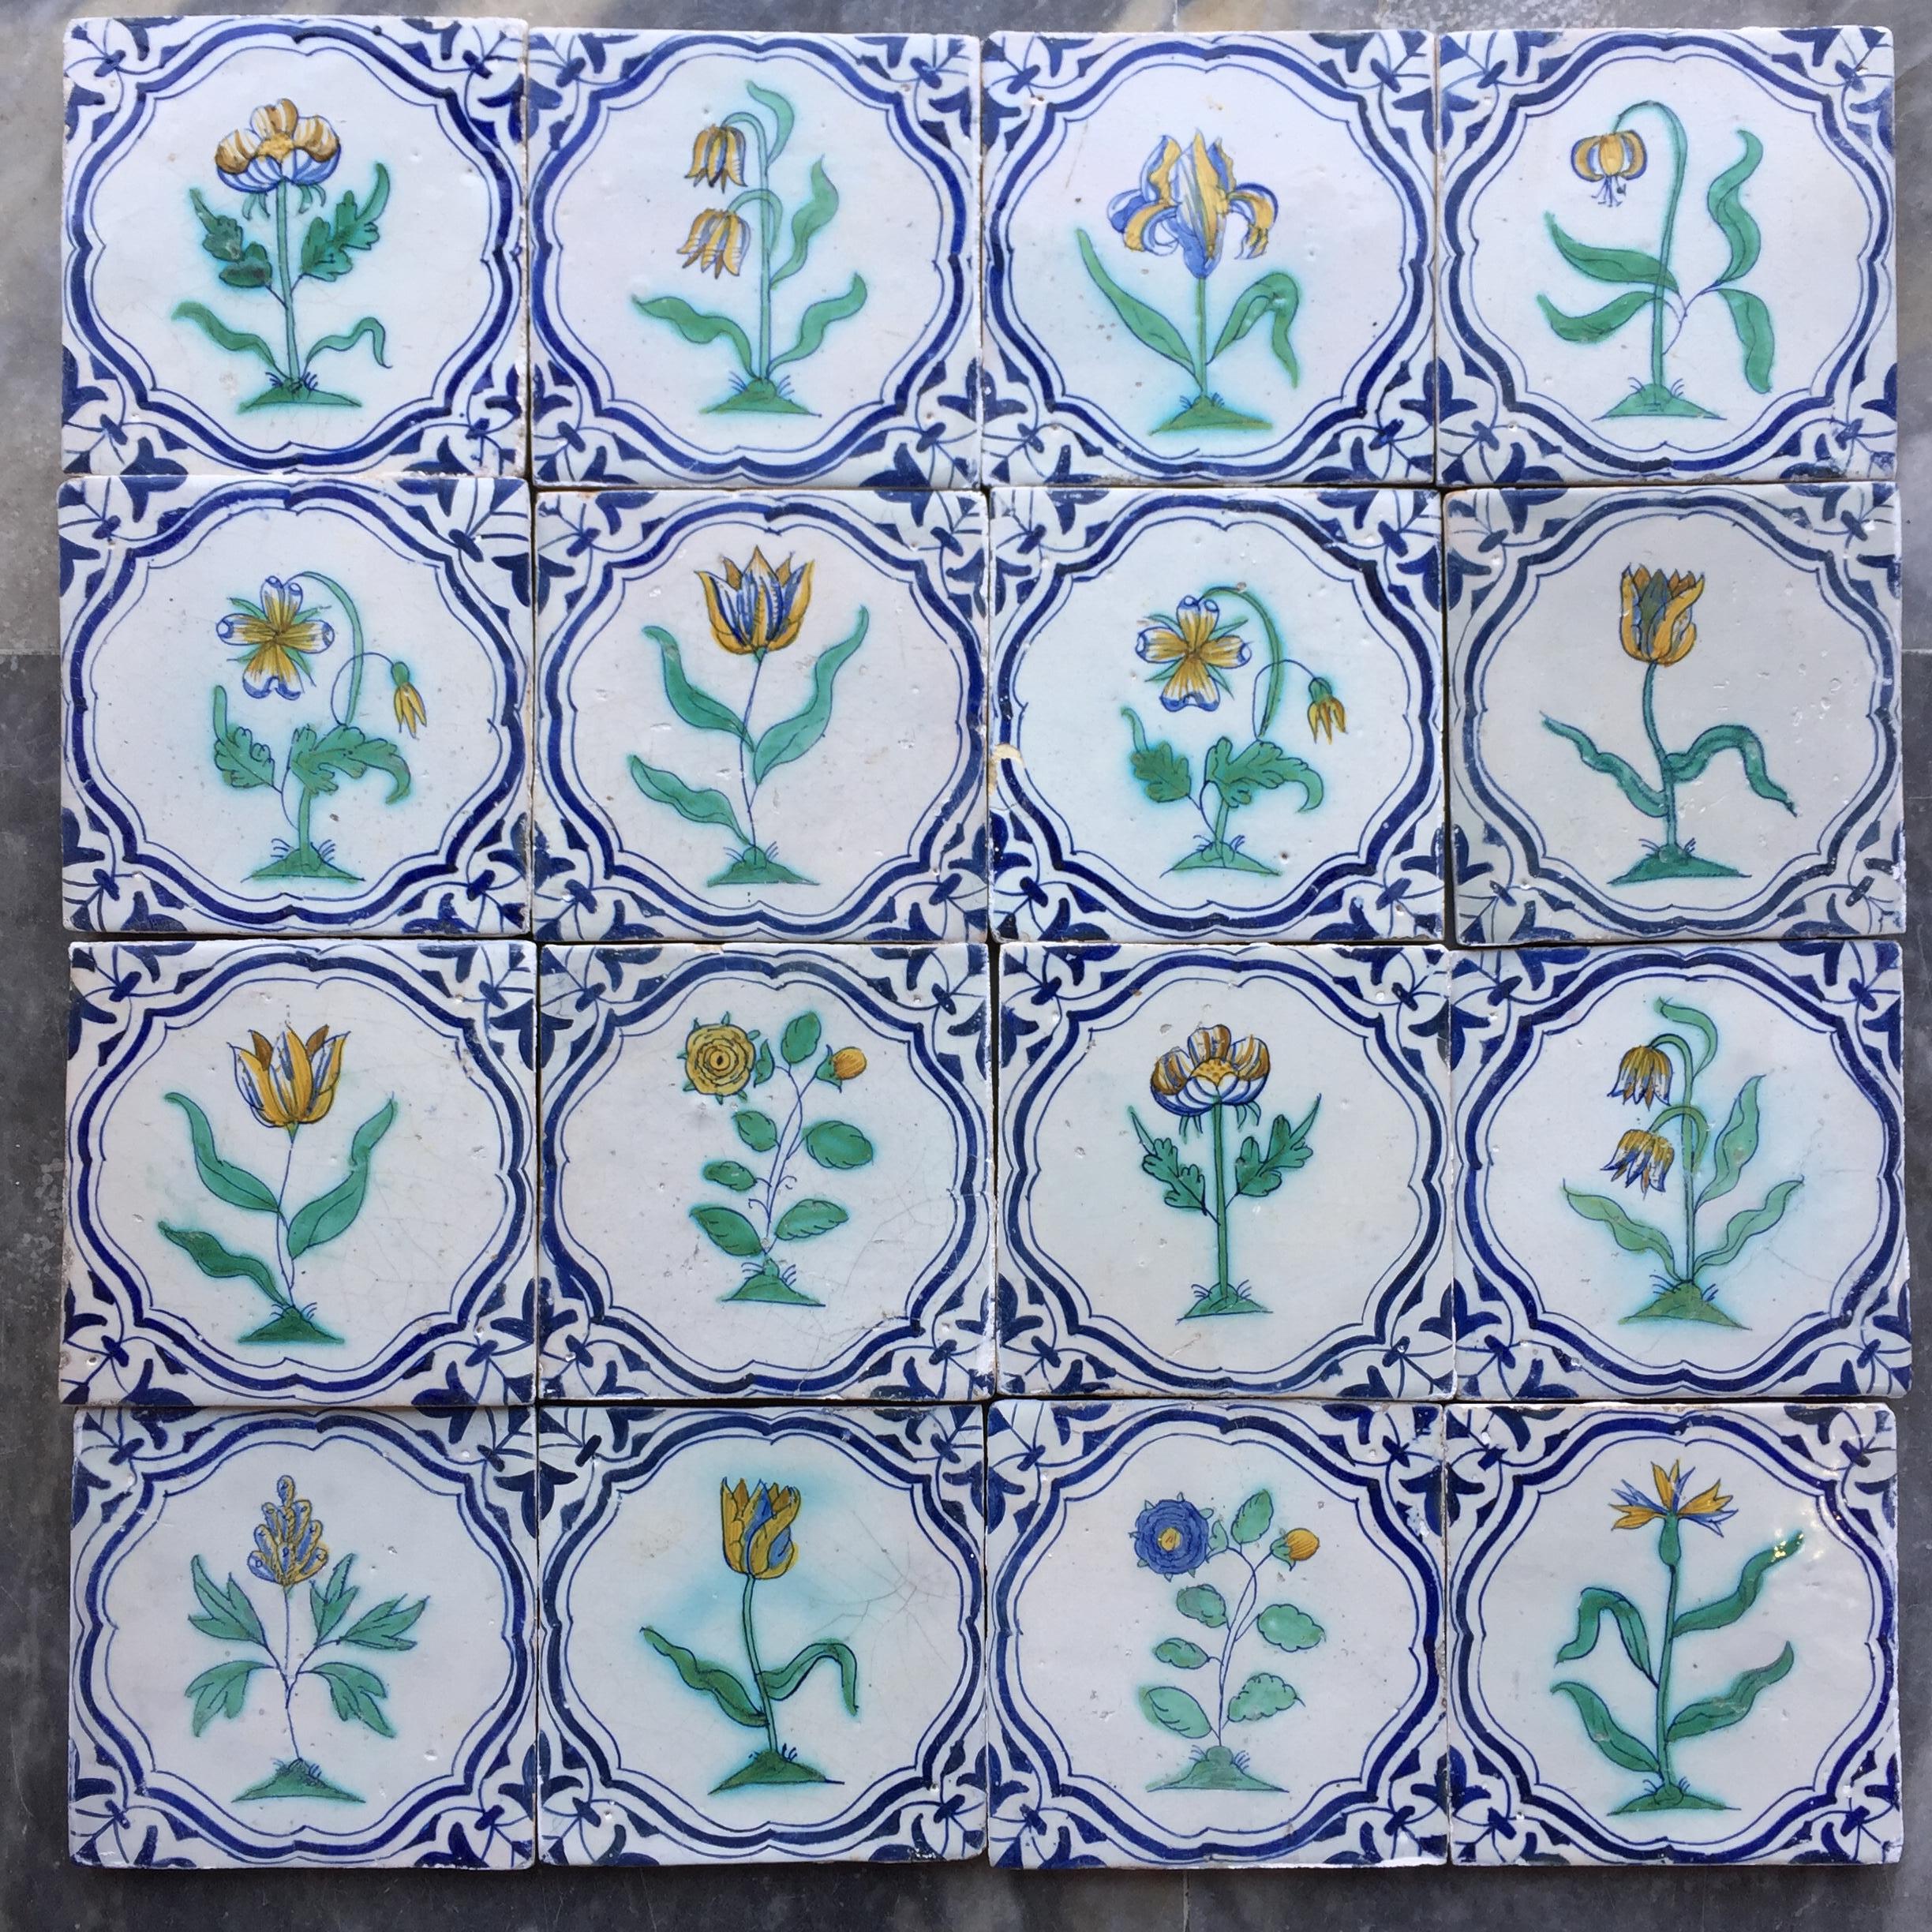 An important and extremely rare set of polychrome Dutch Delft tiles with flowers.
The Netherlands, Rotterdam.
Made circa 1620 - 1640.

This is the only known set of tiles of this design combined with the decoration of single polychrome flowers.